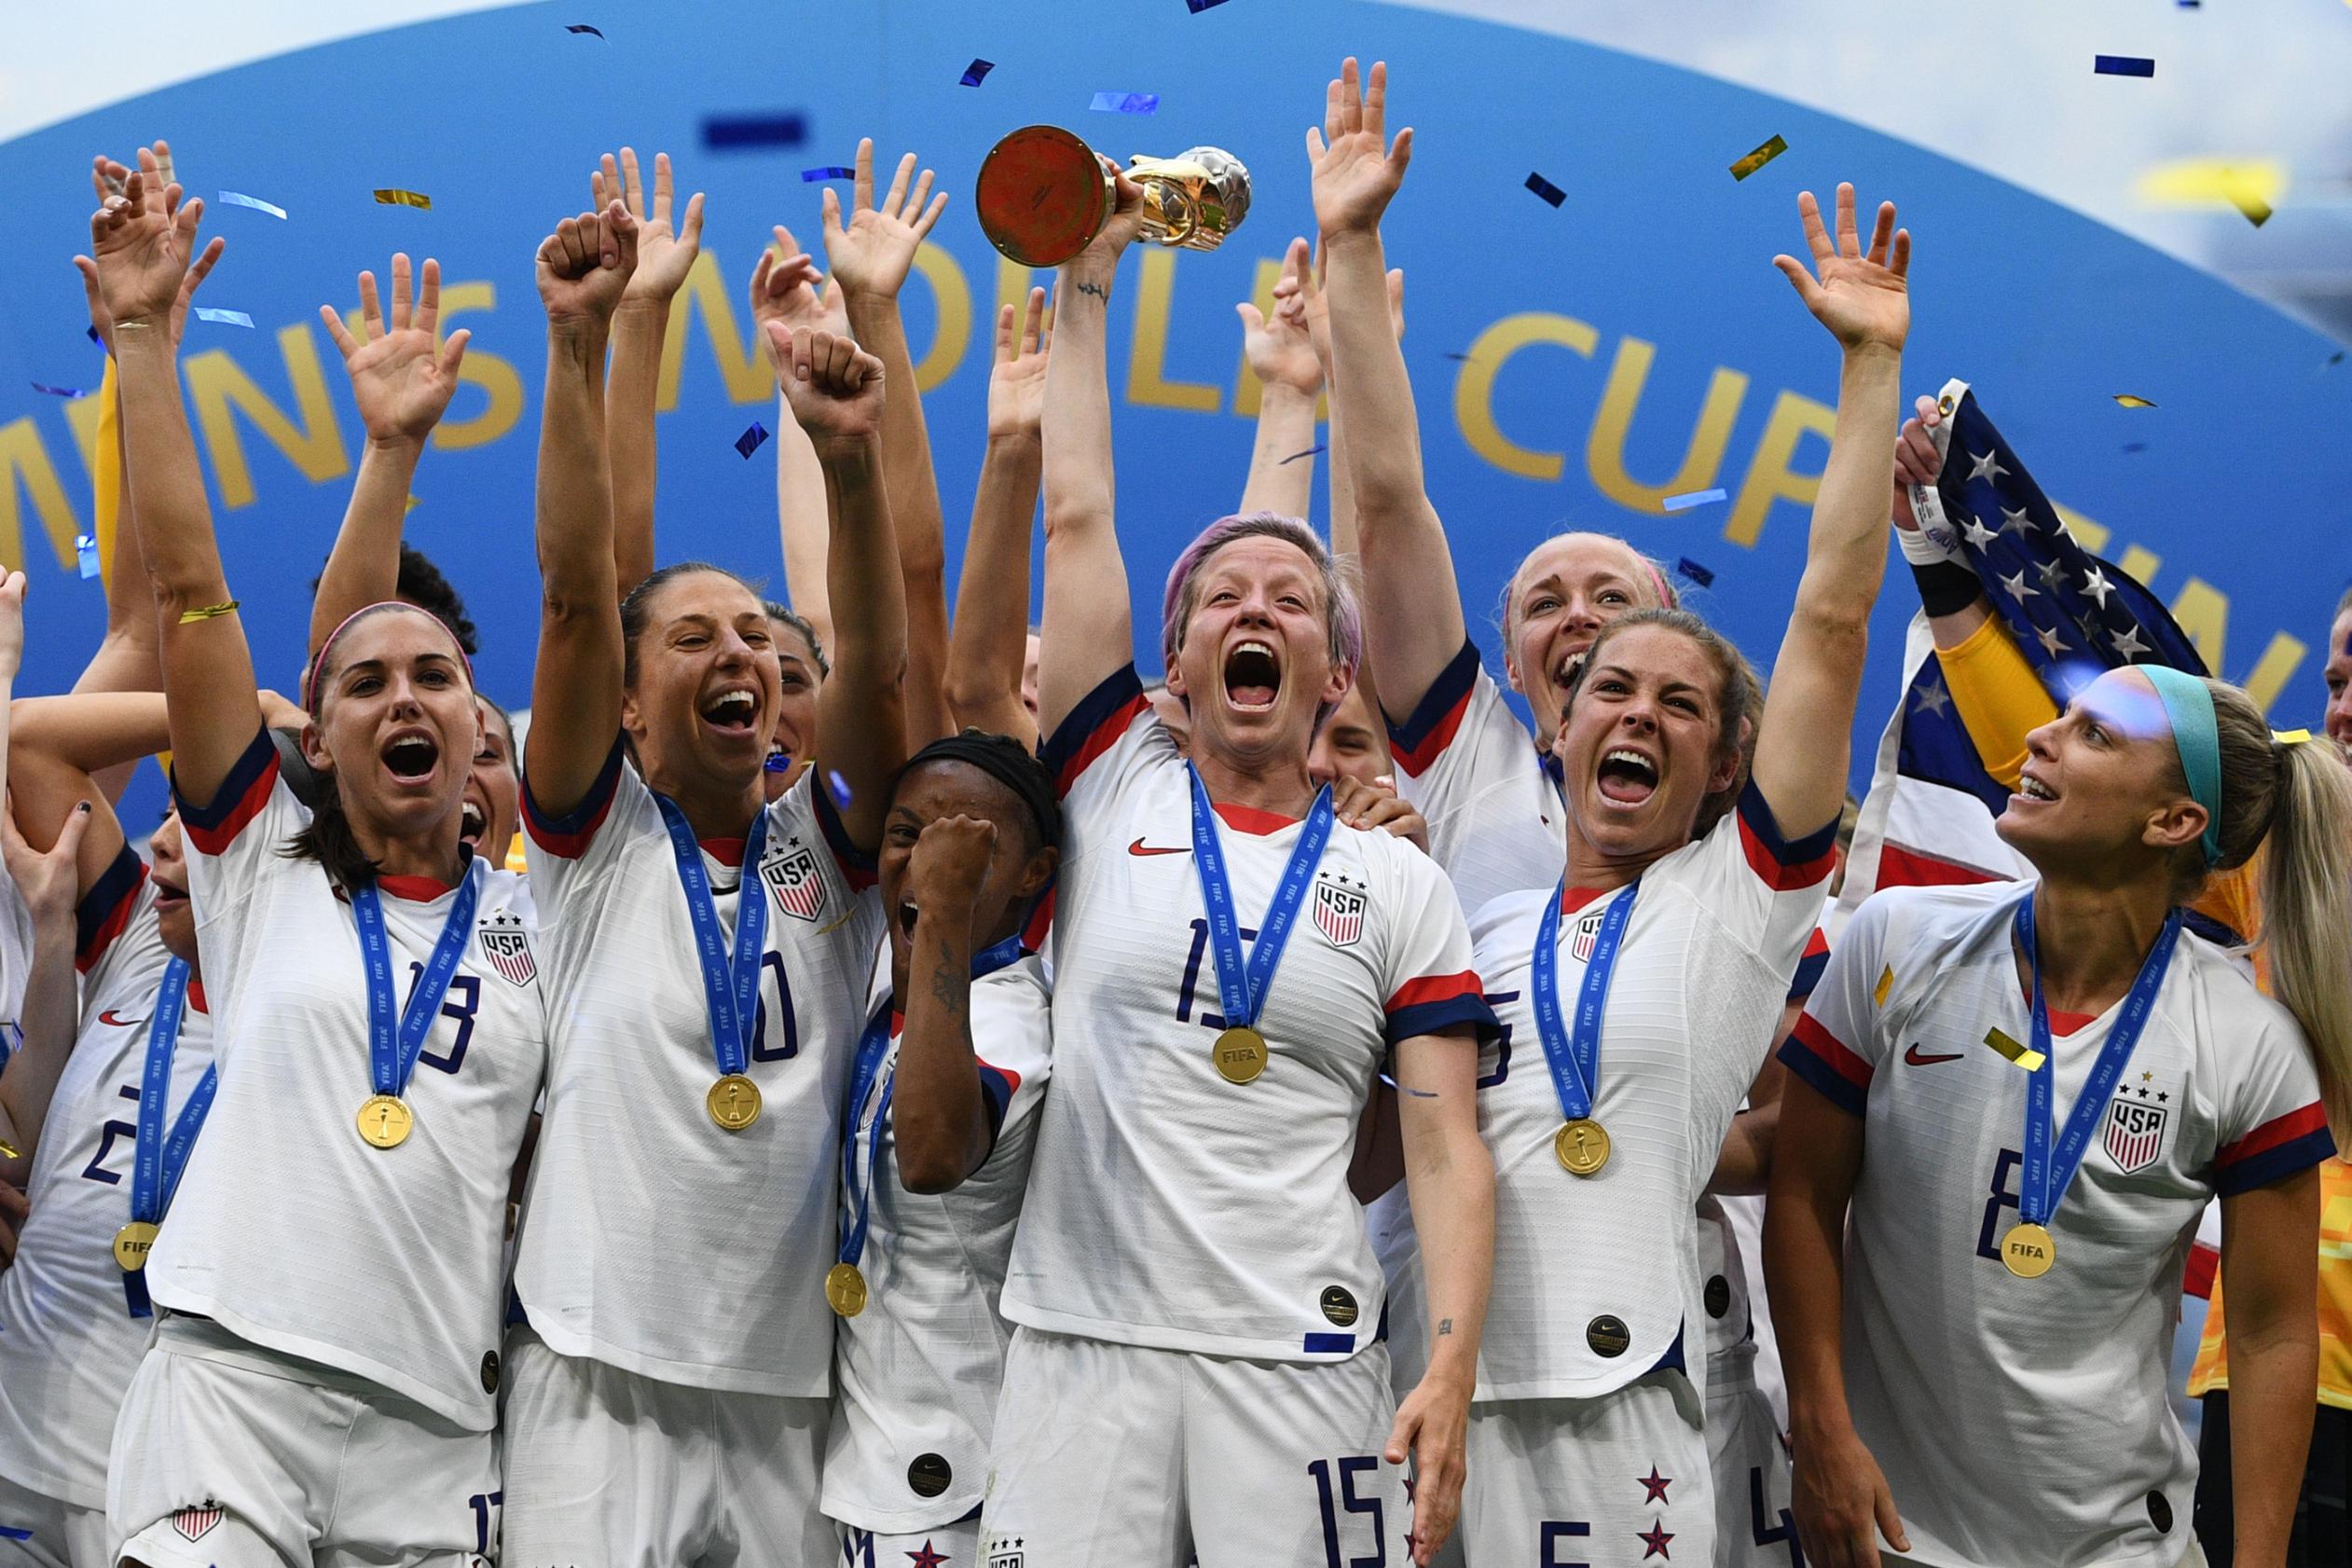 USWNT wins Women's World Cup thanks to Megan Rapinoe and Rose Lavelle goals | CNN